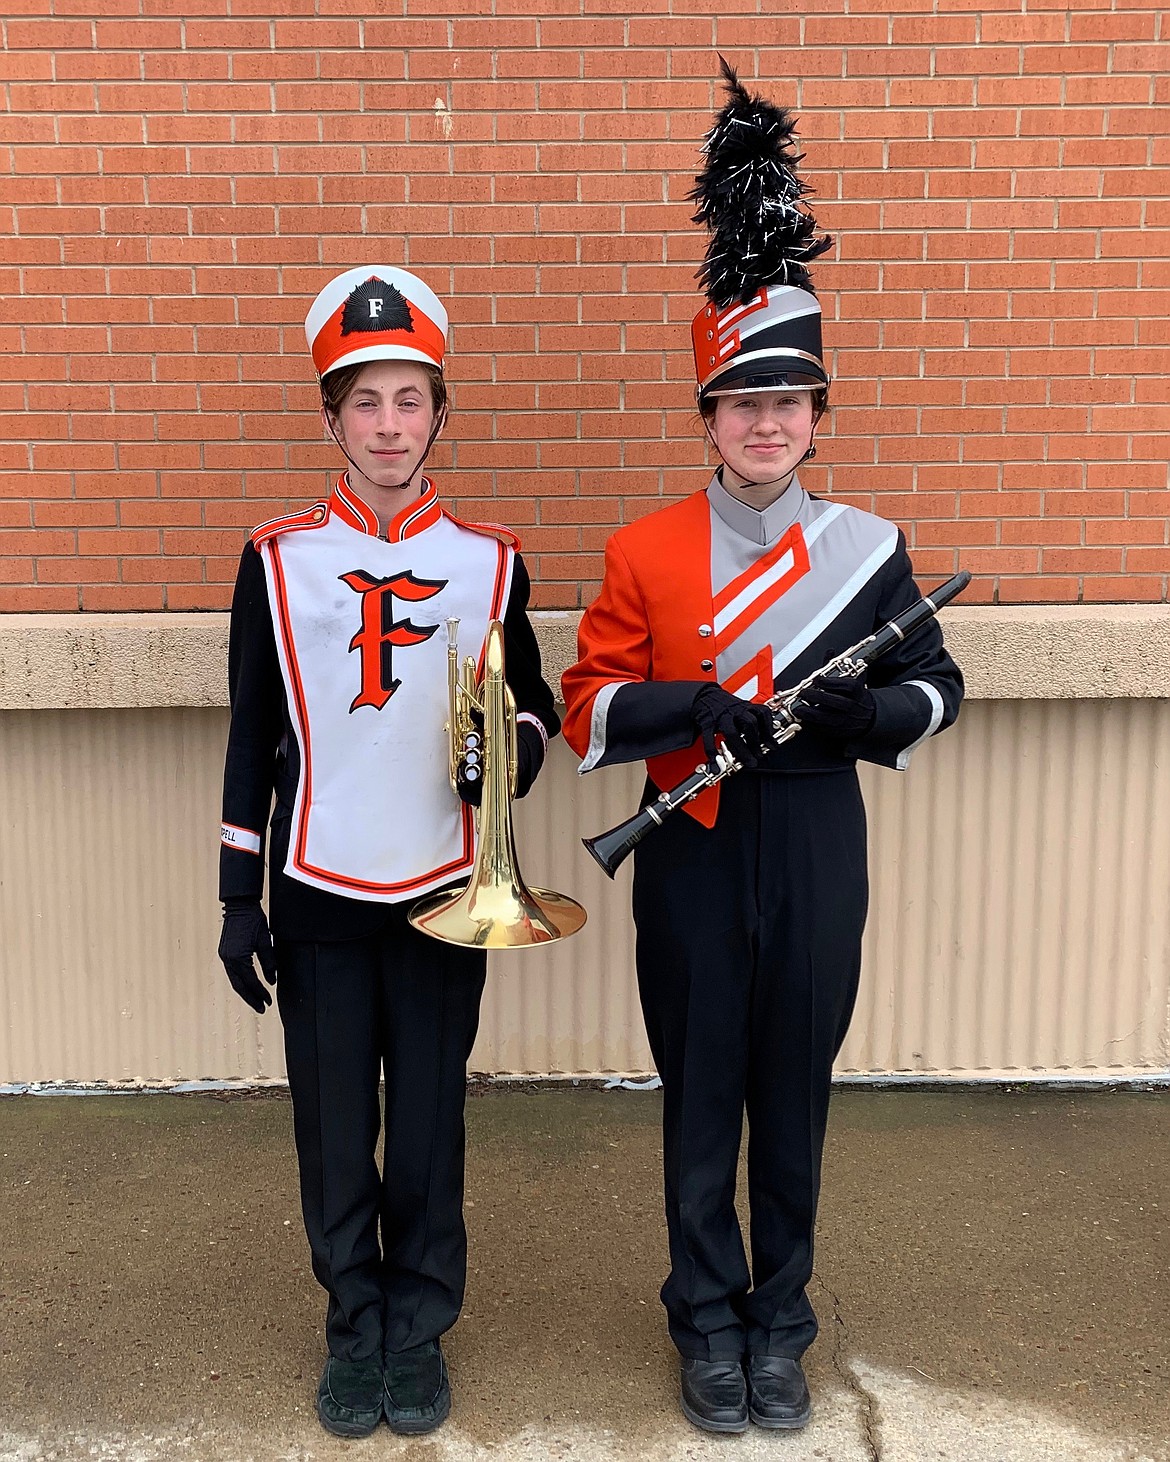 The Flathead High School marching band is set to get its first new uniforms in about 50 years. Students show the old uniform, left, next to the new design, right.